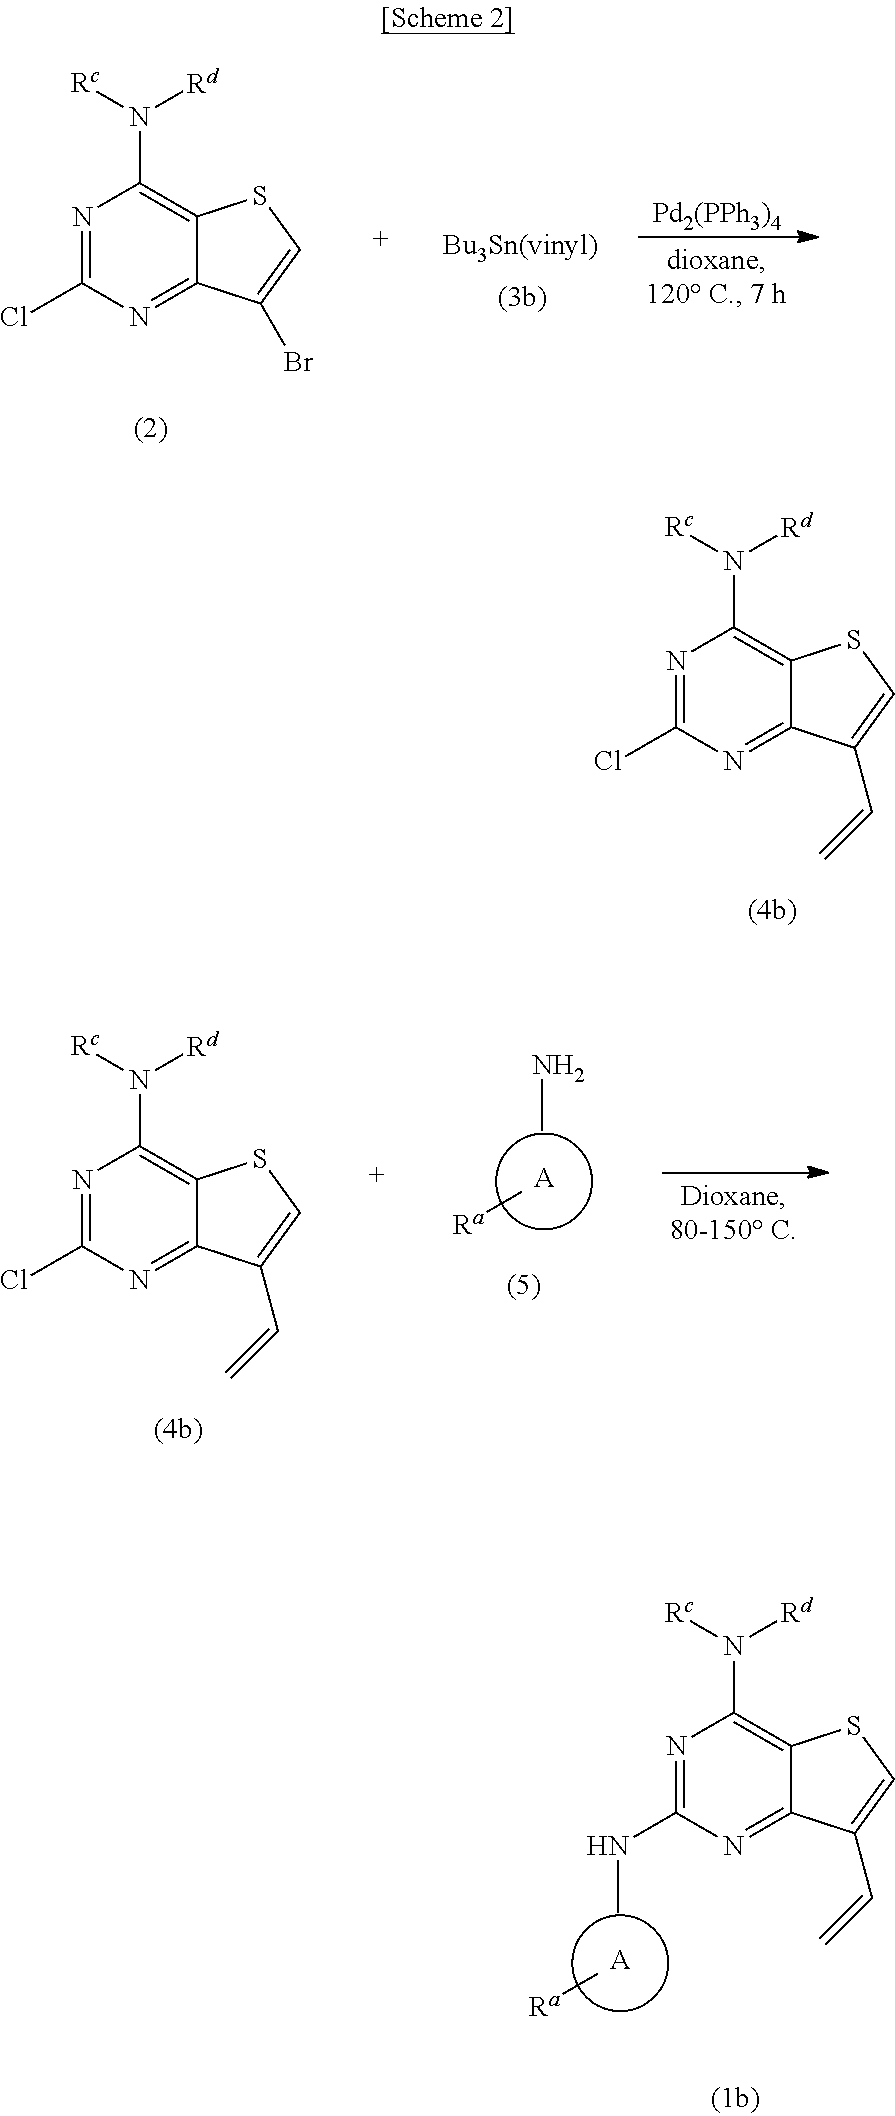 2,4,7-substituted thieno[3,2-d]pyrimidine compounds as protein kinase inhibitors